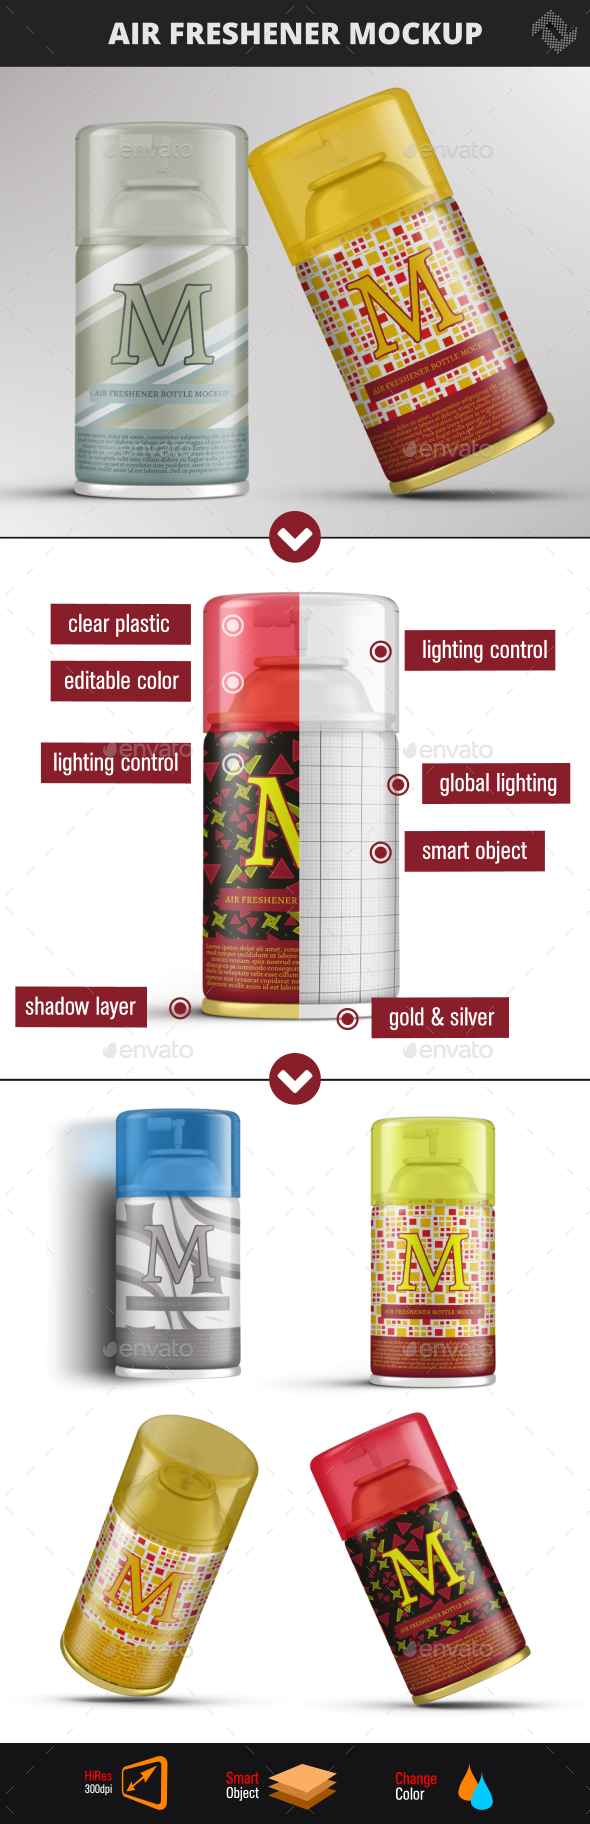 Download 250ml Air Freshener Bottle Mockup By Fusionhorn Graphicriver